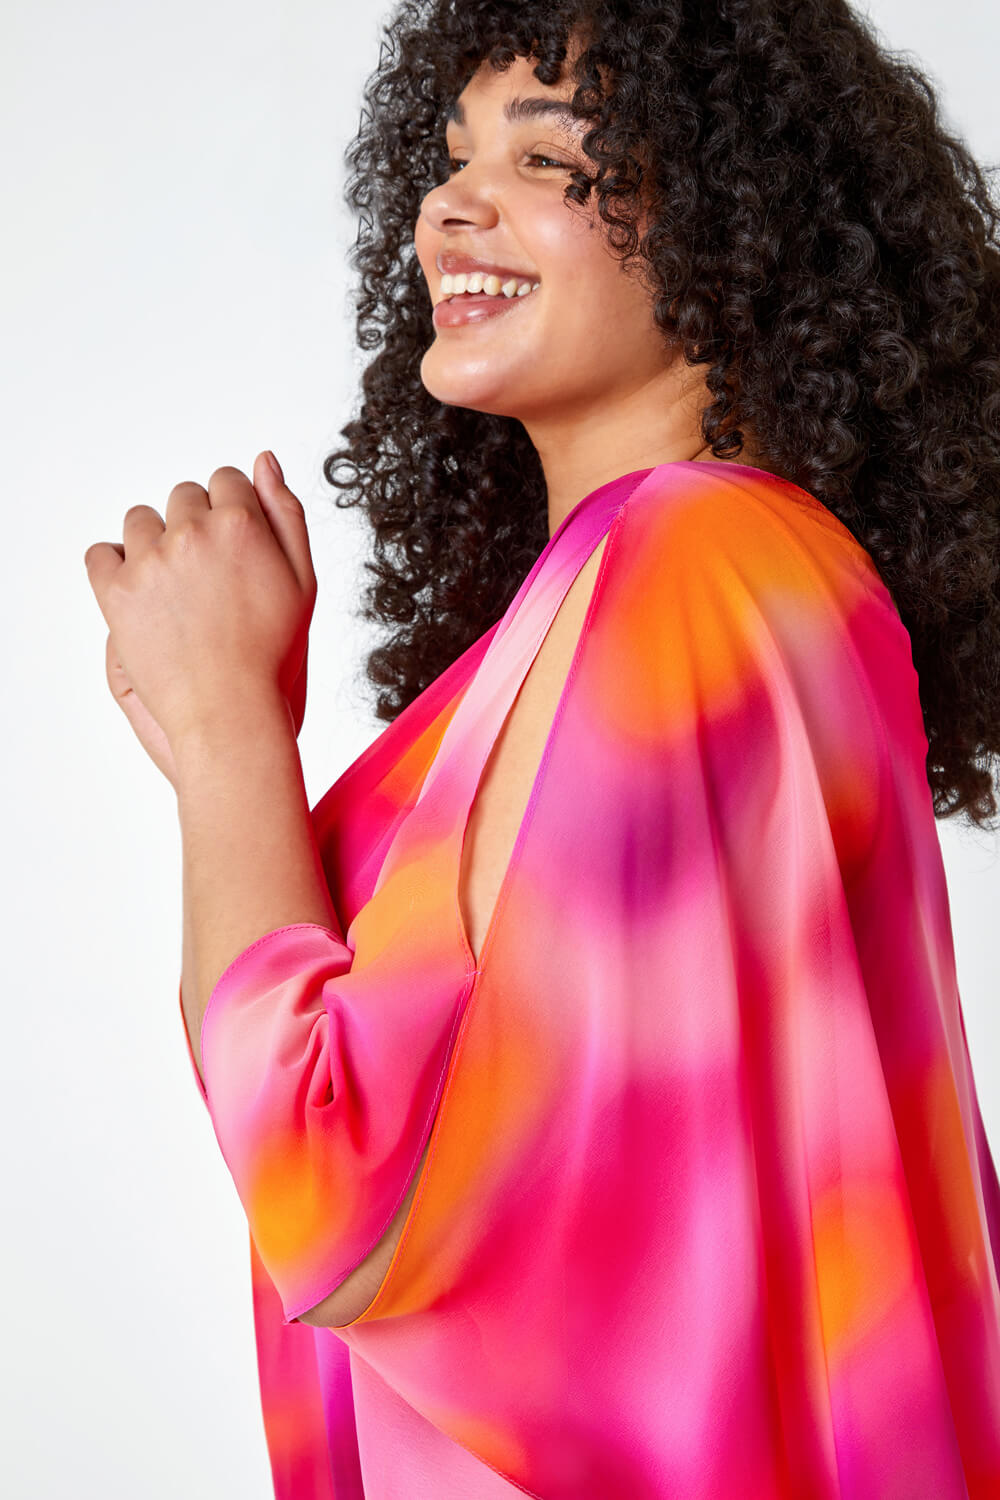 PINK Curve Ombre Print Chiffon Overlay Top, Image 4 of 5